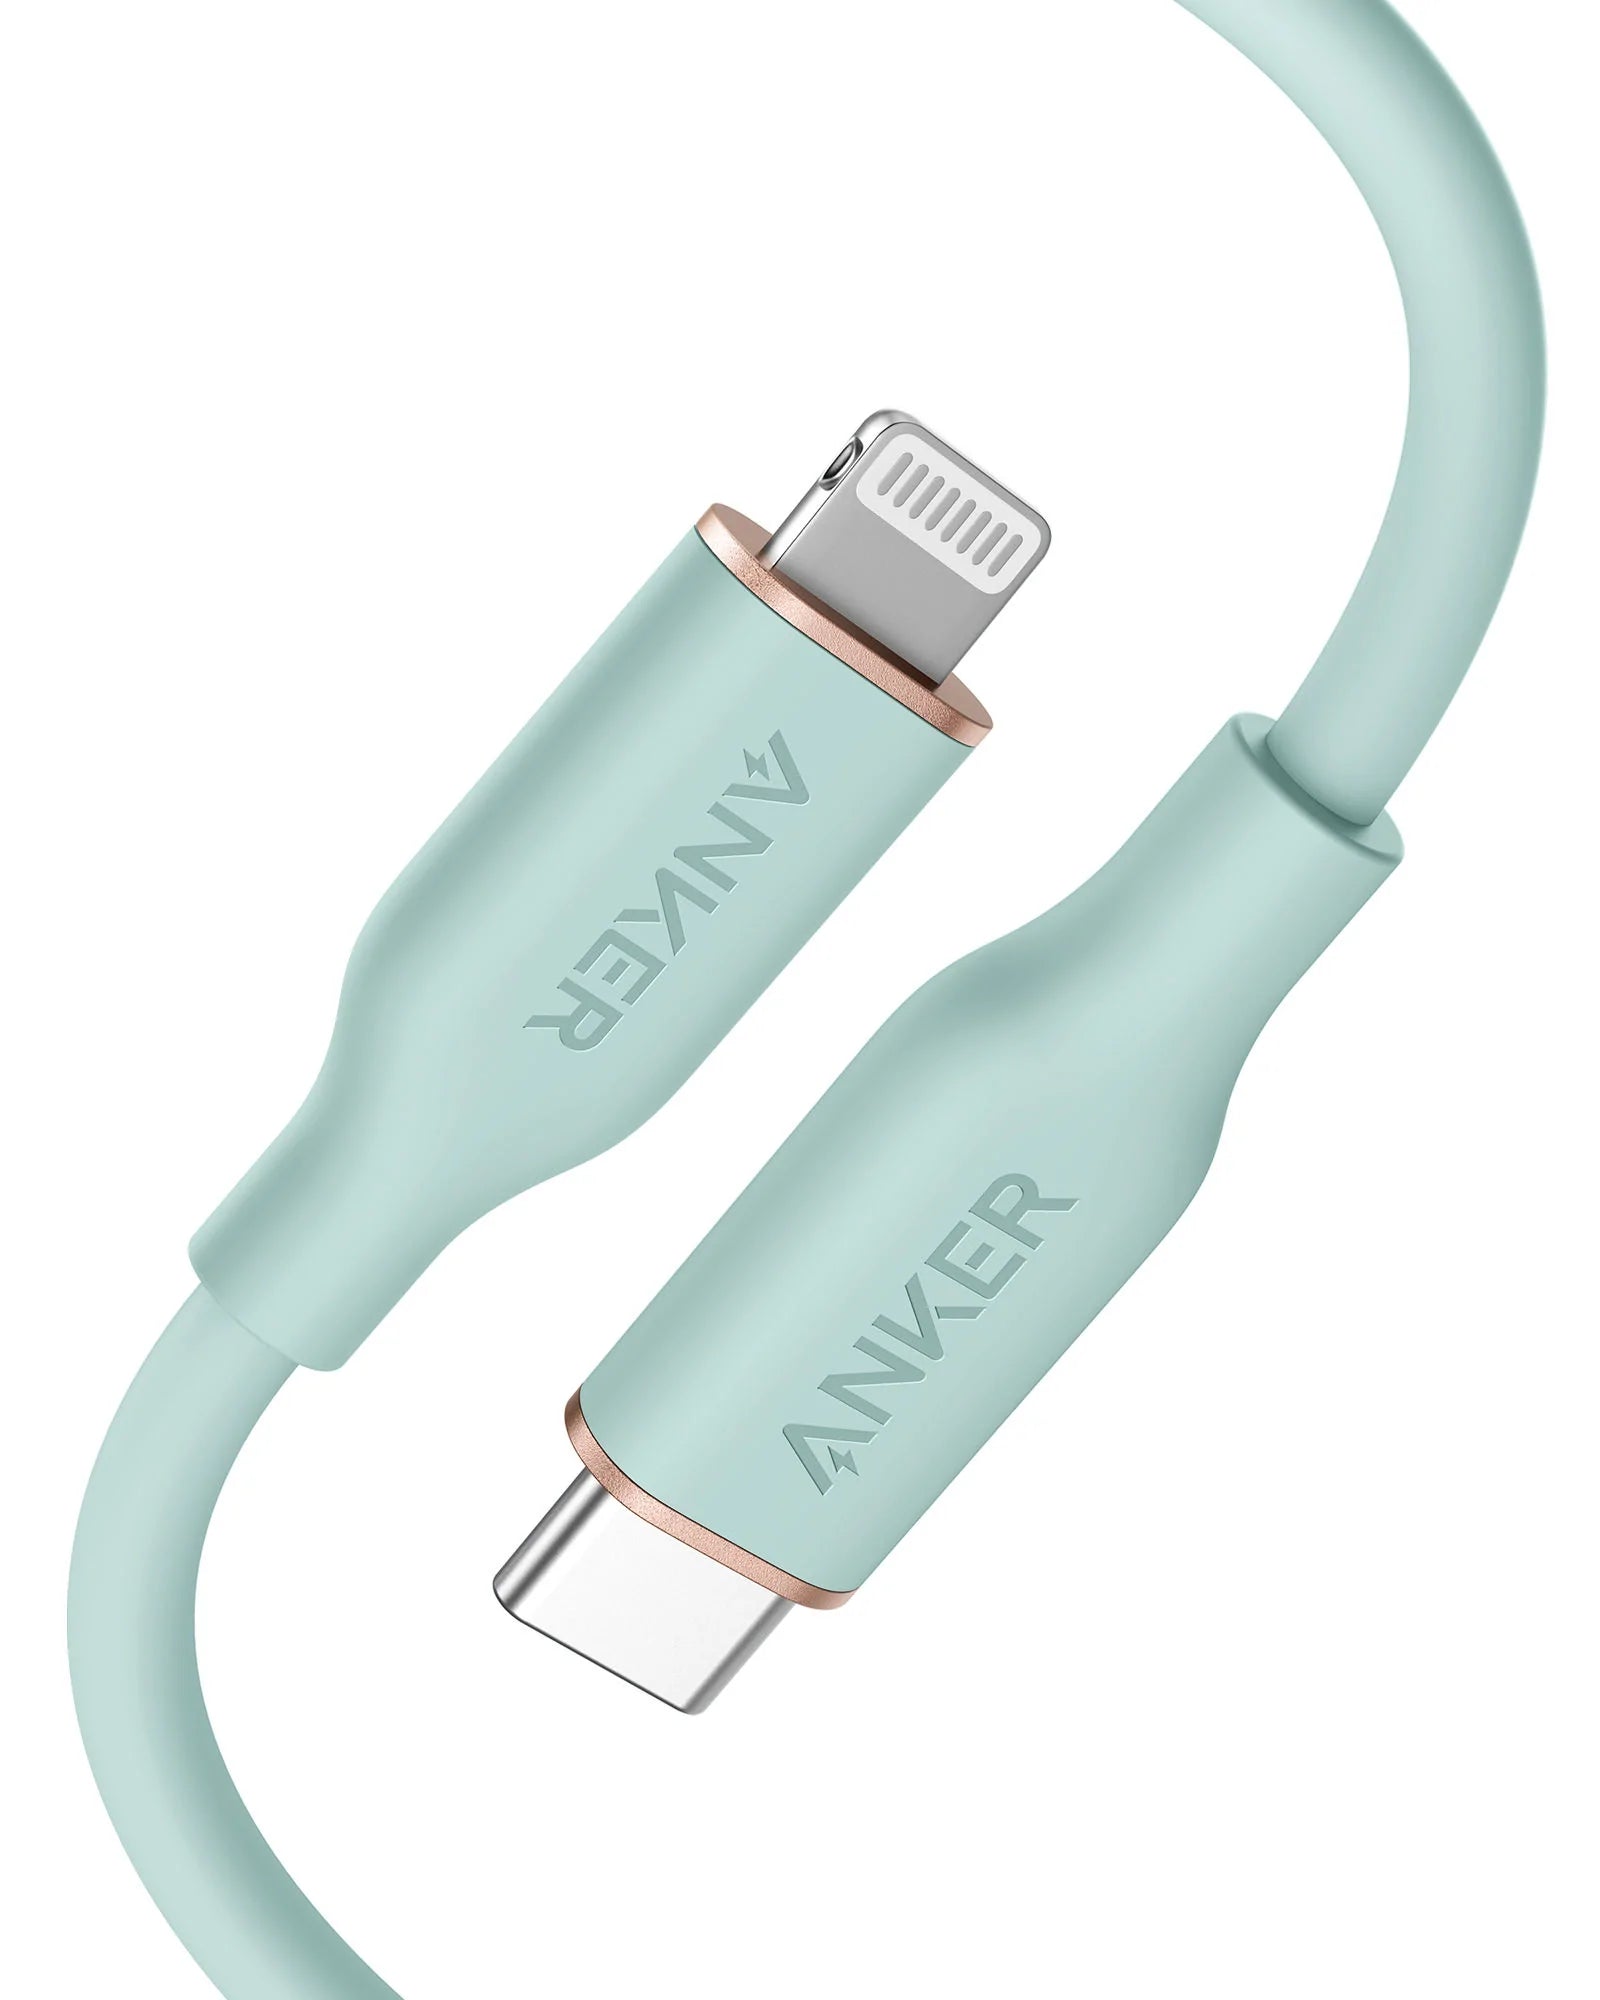 Anker Power Line III Flow USB C to Lightning Cable Mint Green